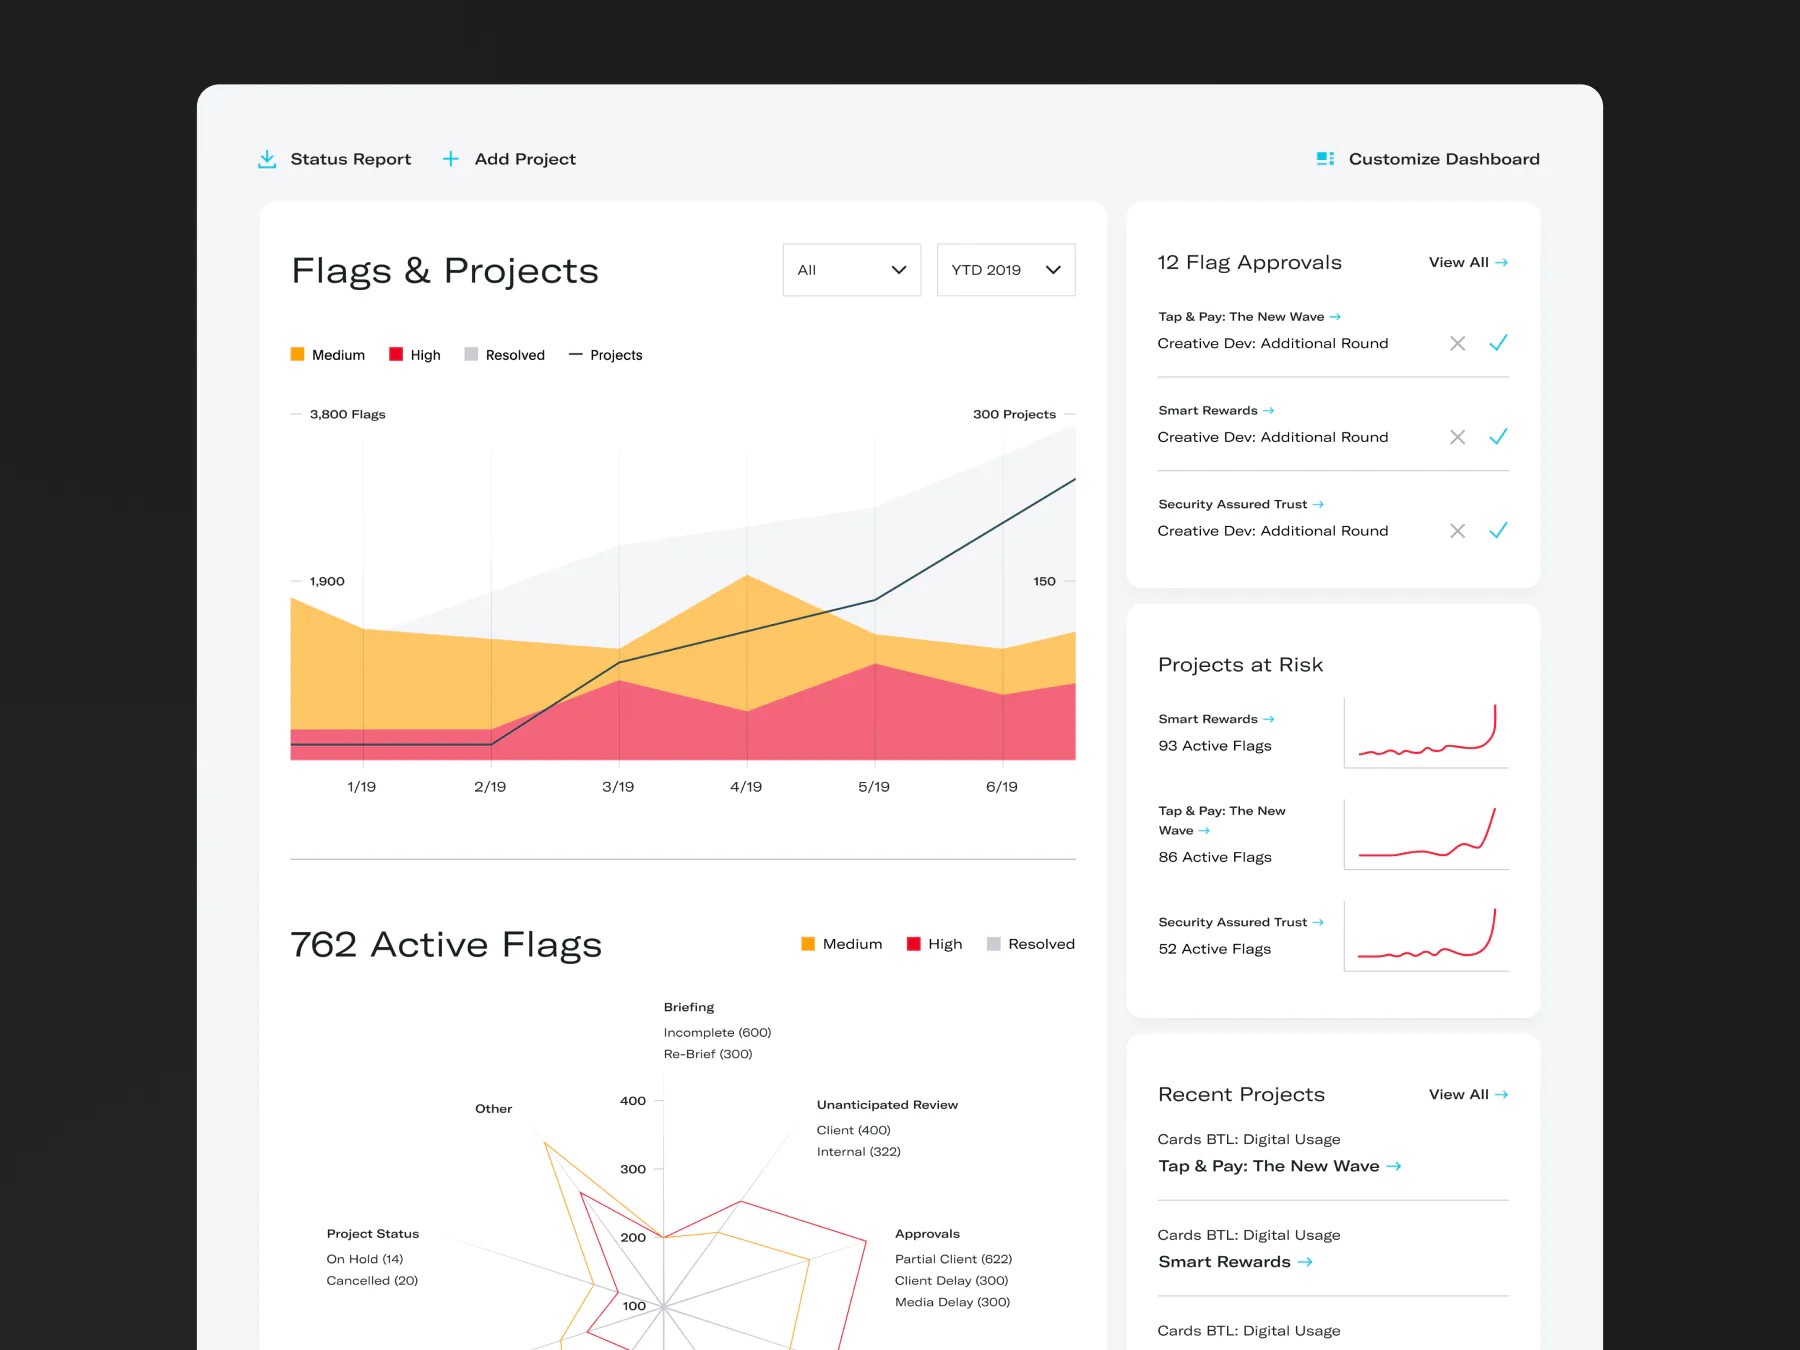 Project management dashboard with status graphs, flag approvals, and project risk assessments.